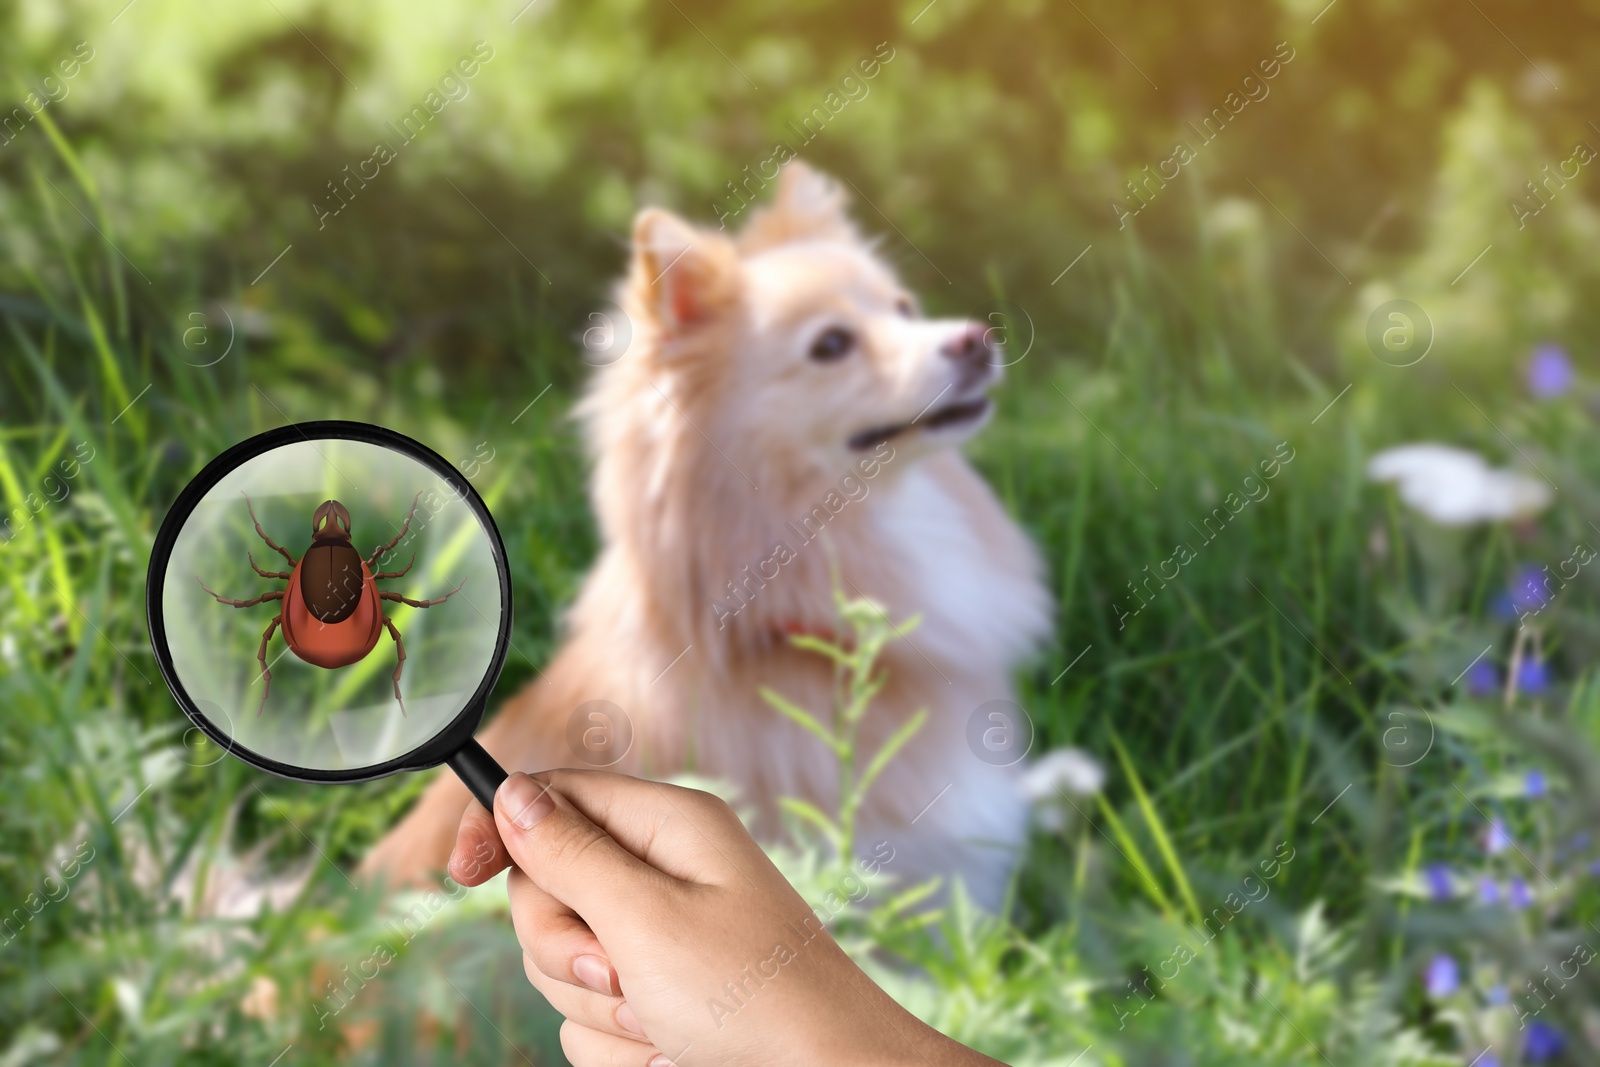 Image of Cute dog outdoors and woman showing tick with magnifying glass, selective focus. Illustration